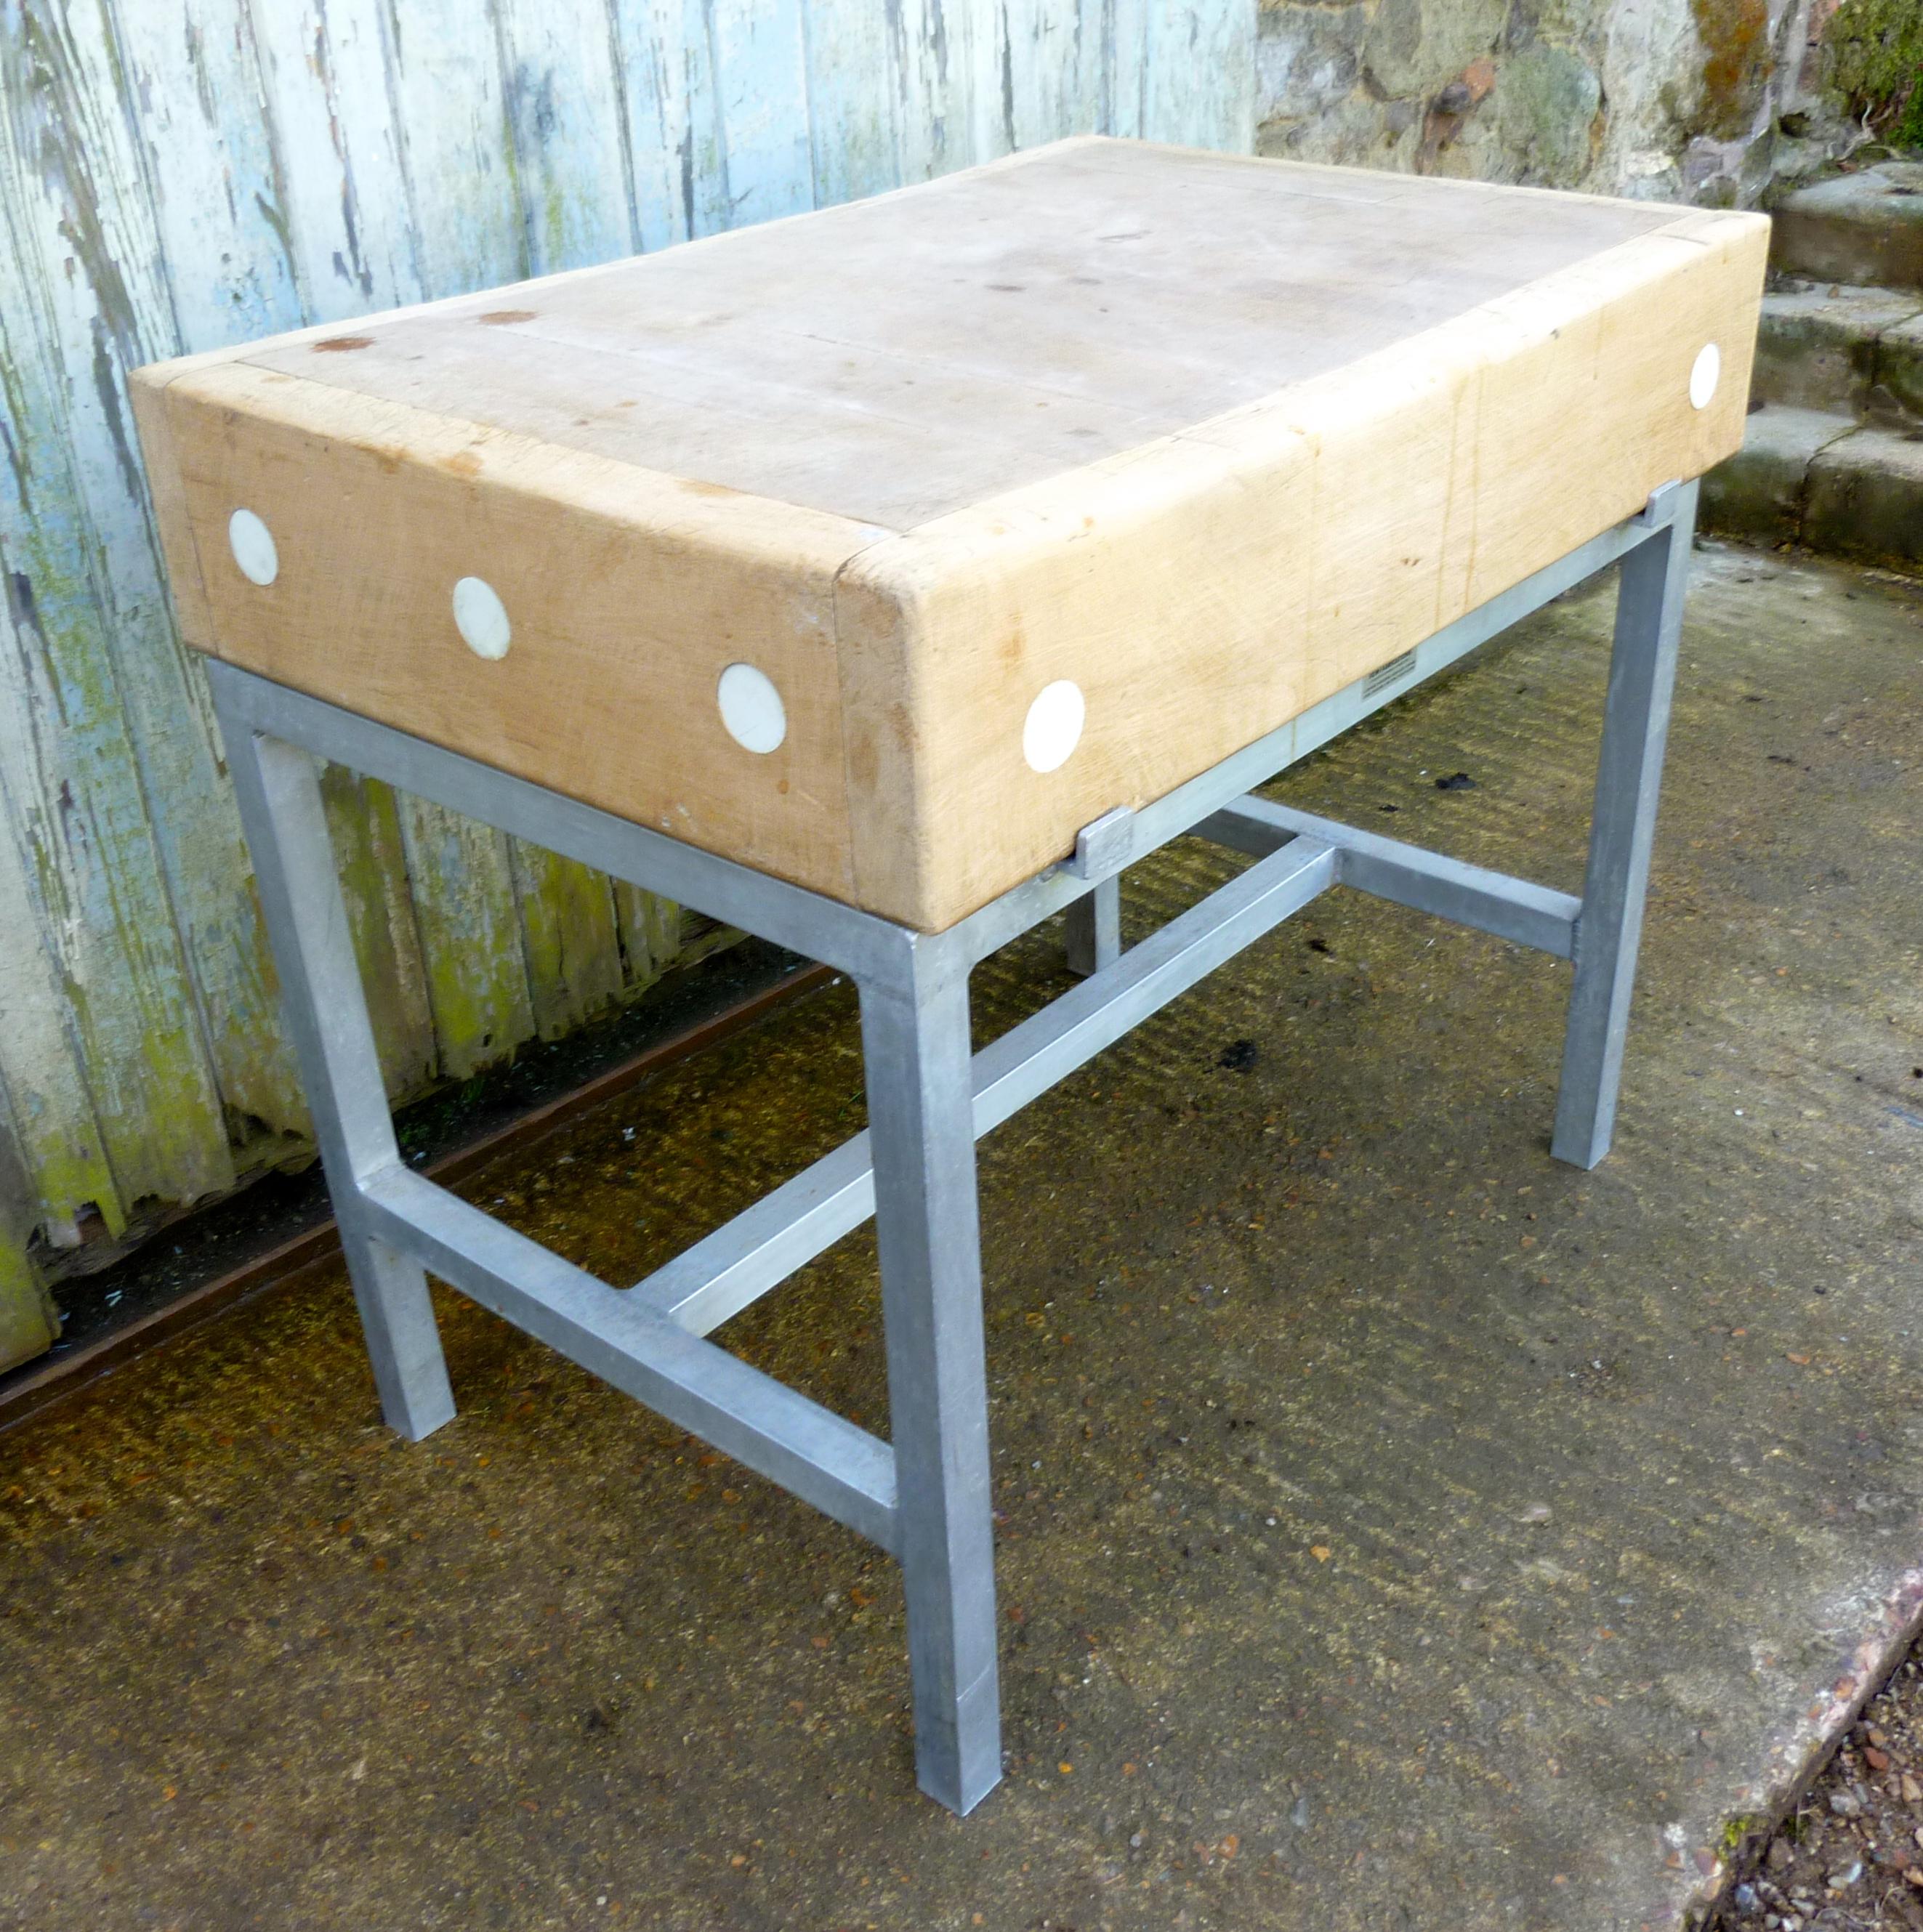 Sycamore Butchers Block on Industrial Style Stand

This is a Good size and obviously very heavy piece, the Sycamore top is in very good used condition, it lifts off from the aluminium base and could be worked in to a traditional or modern kitchen